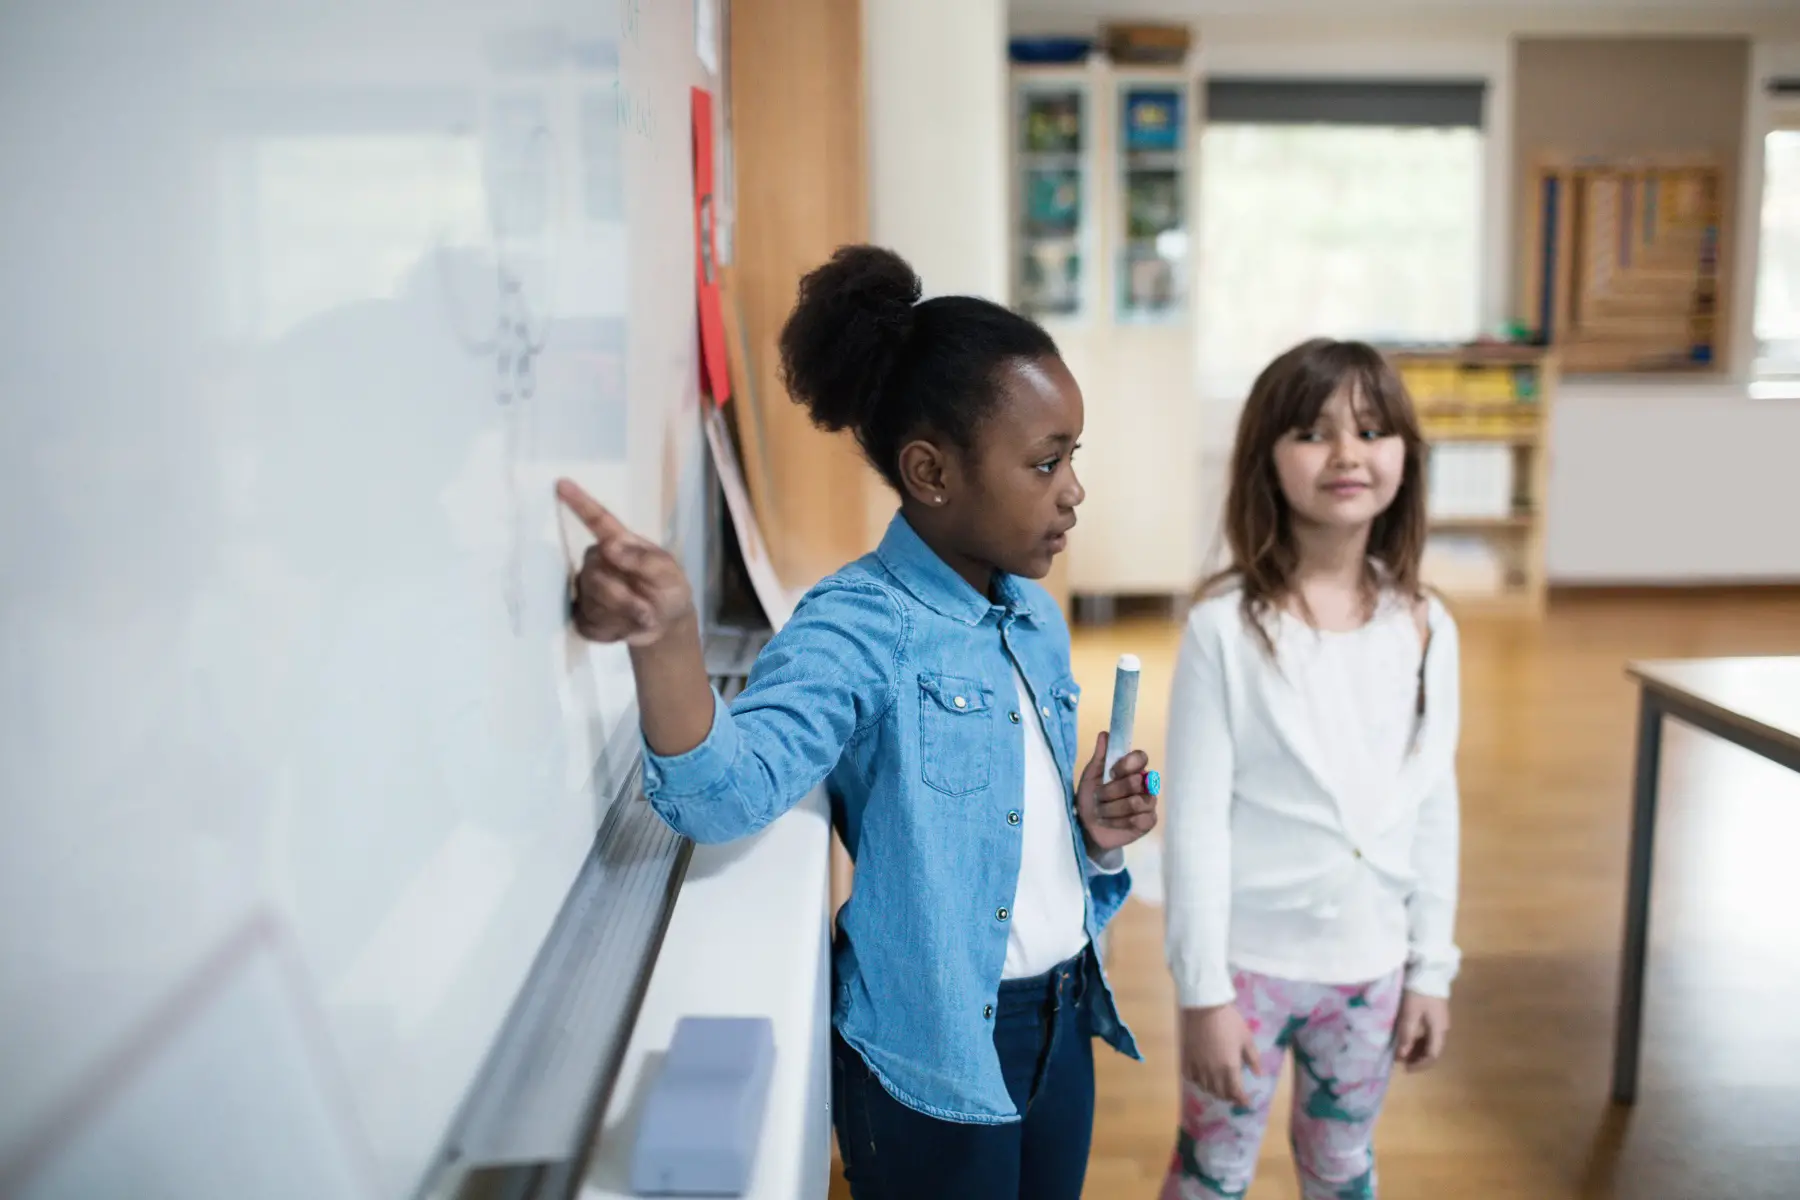 two young girls of different ethnicities (black and caucasian) standing next to a whiteboard in front of the class